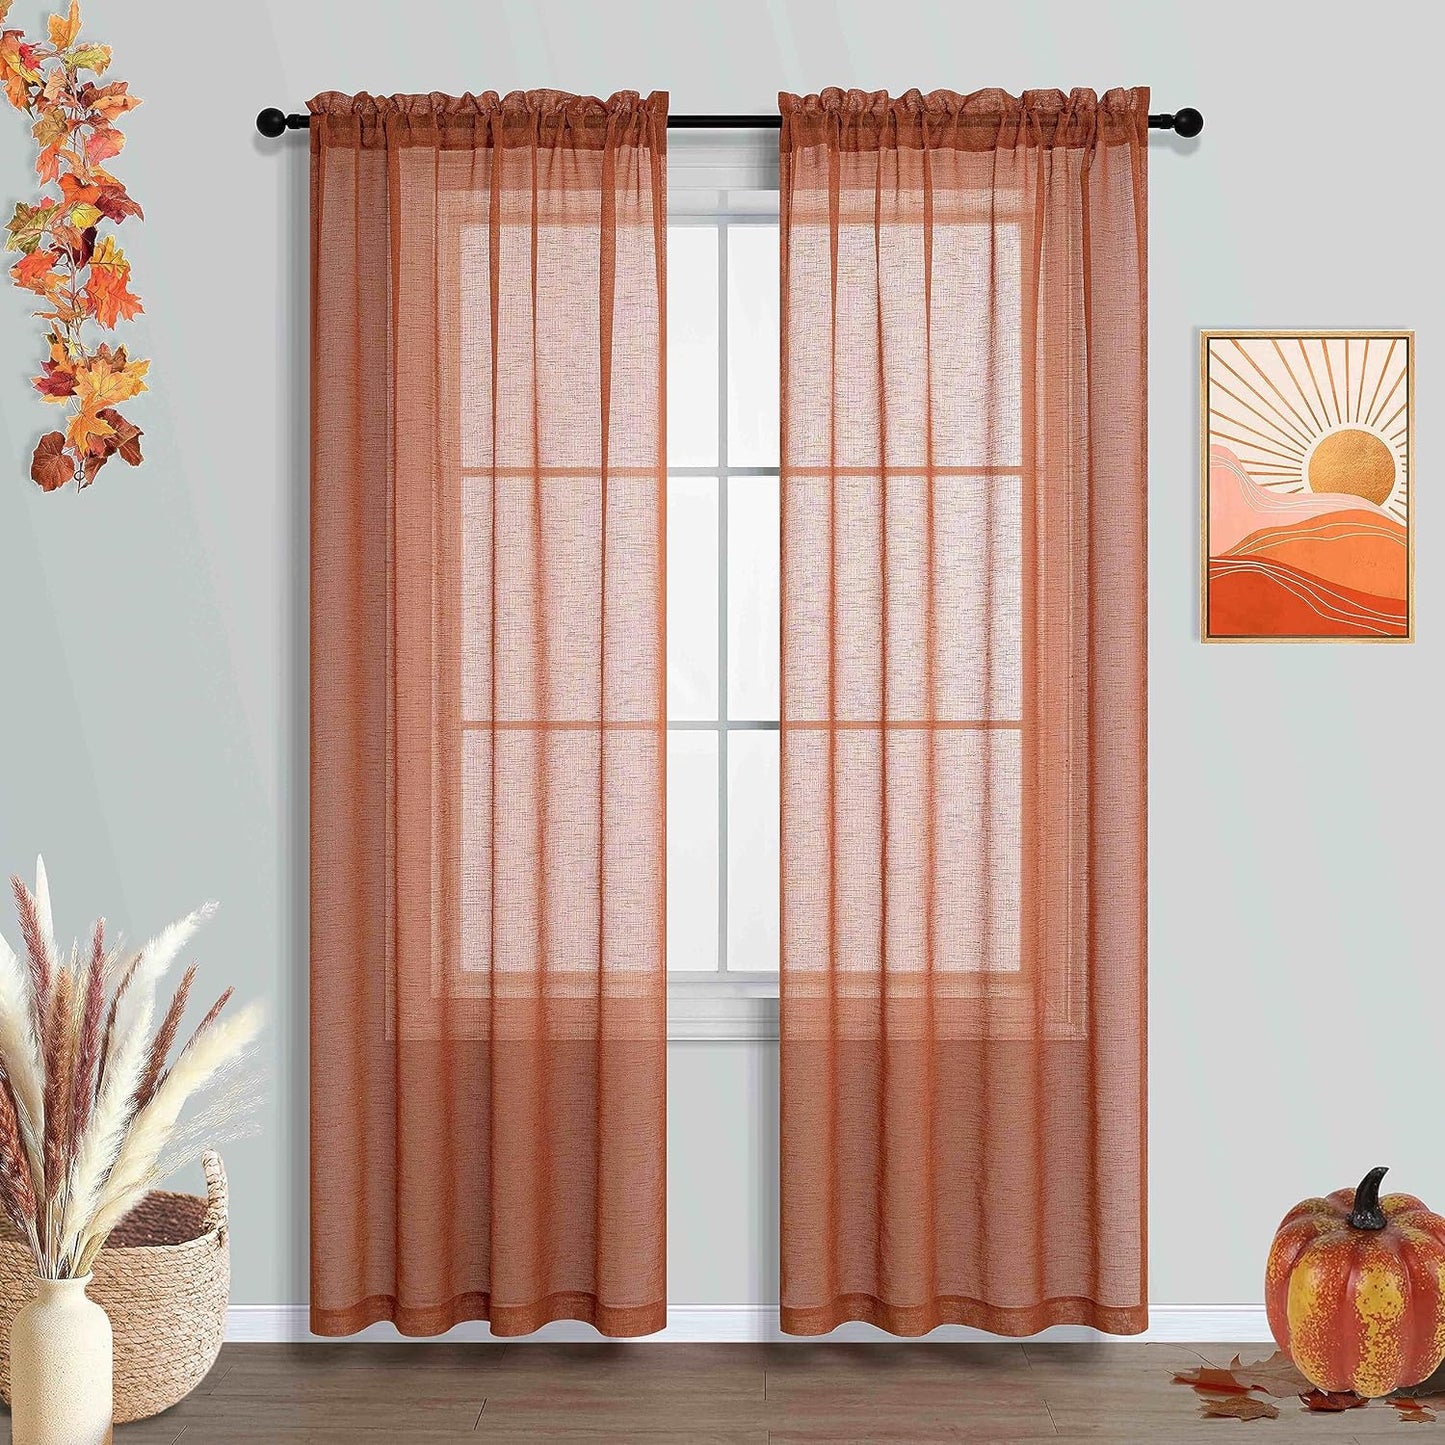 Burnt Orange Sheer Curtains 84 Inch Length for Bedroom 2 Panels Pumpkin Thanksgiving Day Rod Pocket Bohemian Semi Sheer Curtain Rustic Light Filtering Boho Curtains for Living Room 84 Inches Long  MRS.NATURALL TEXTILE Terracotta 42X84 